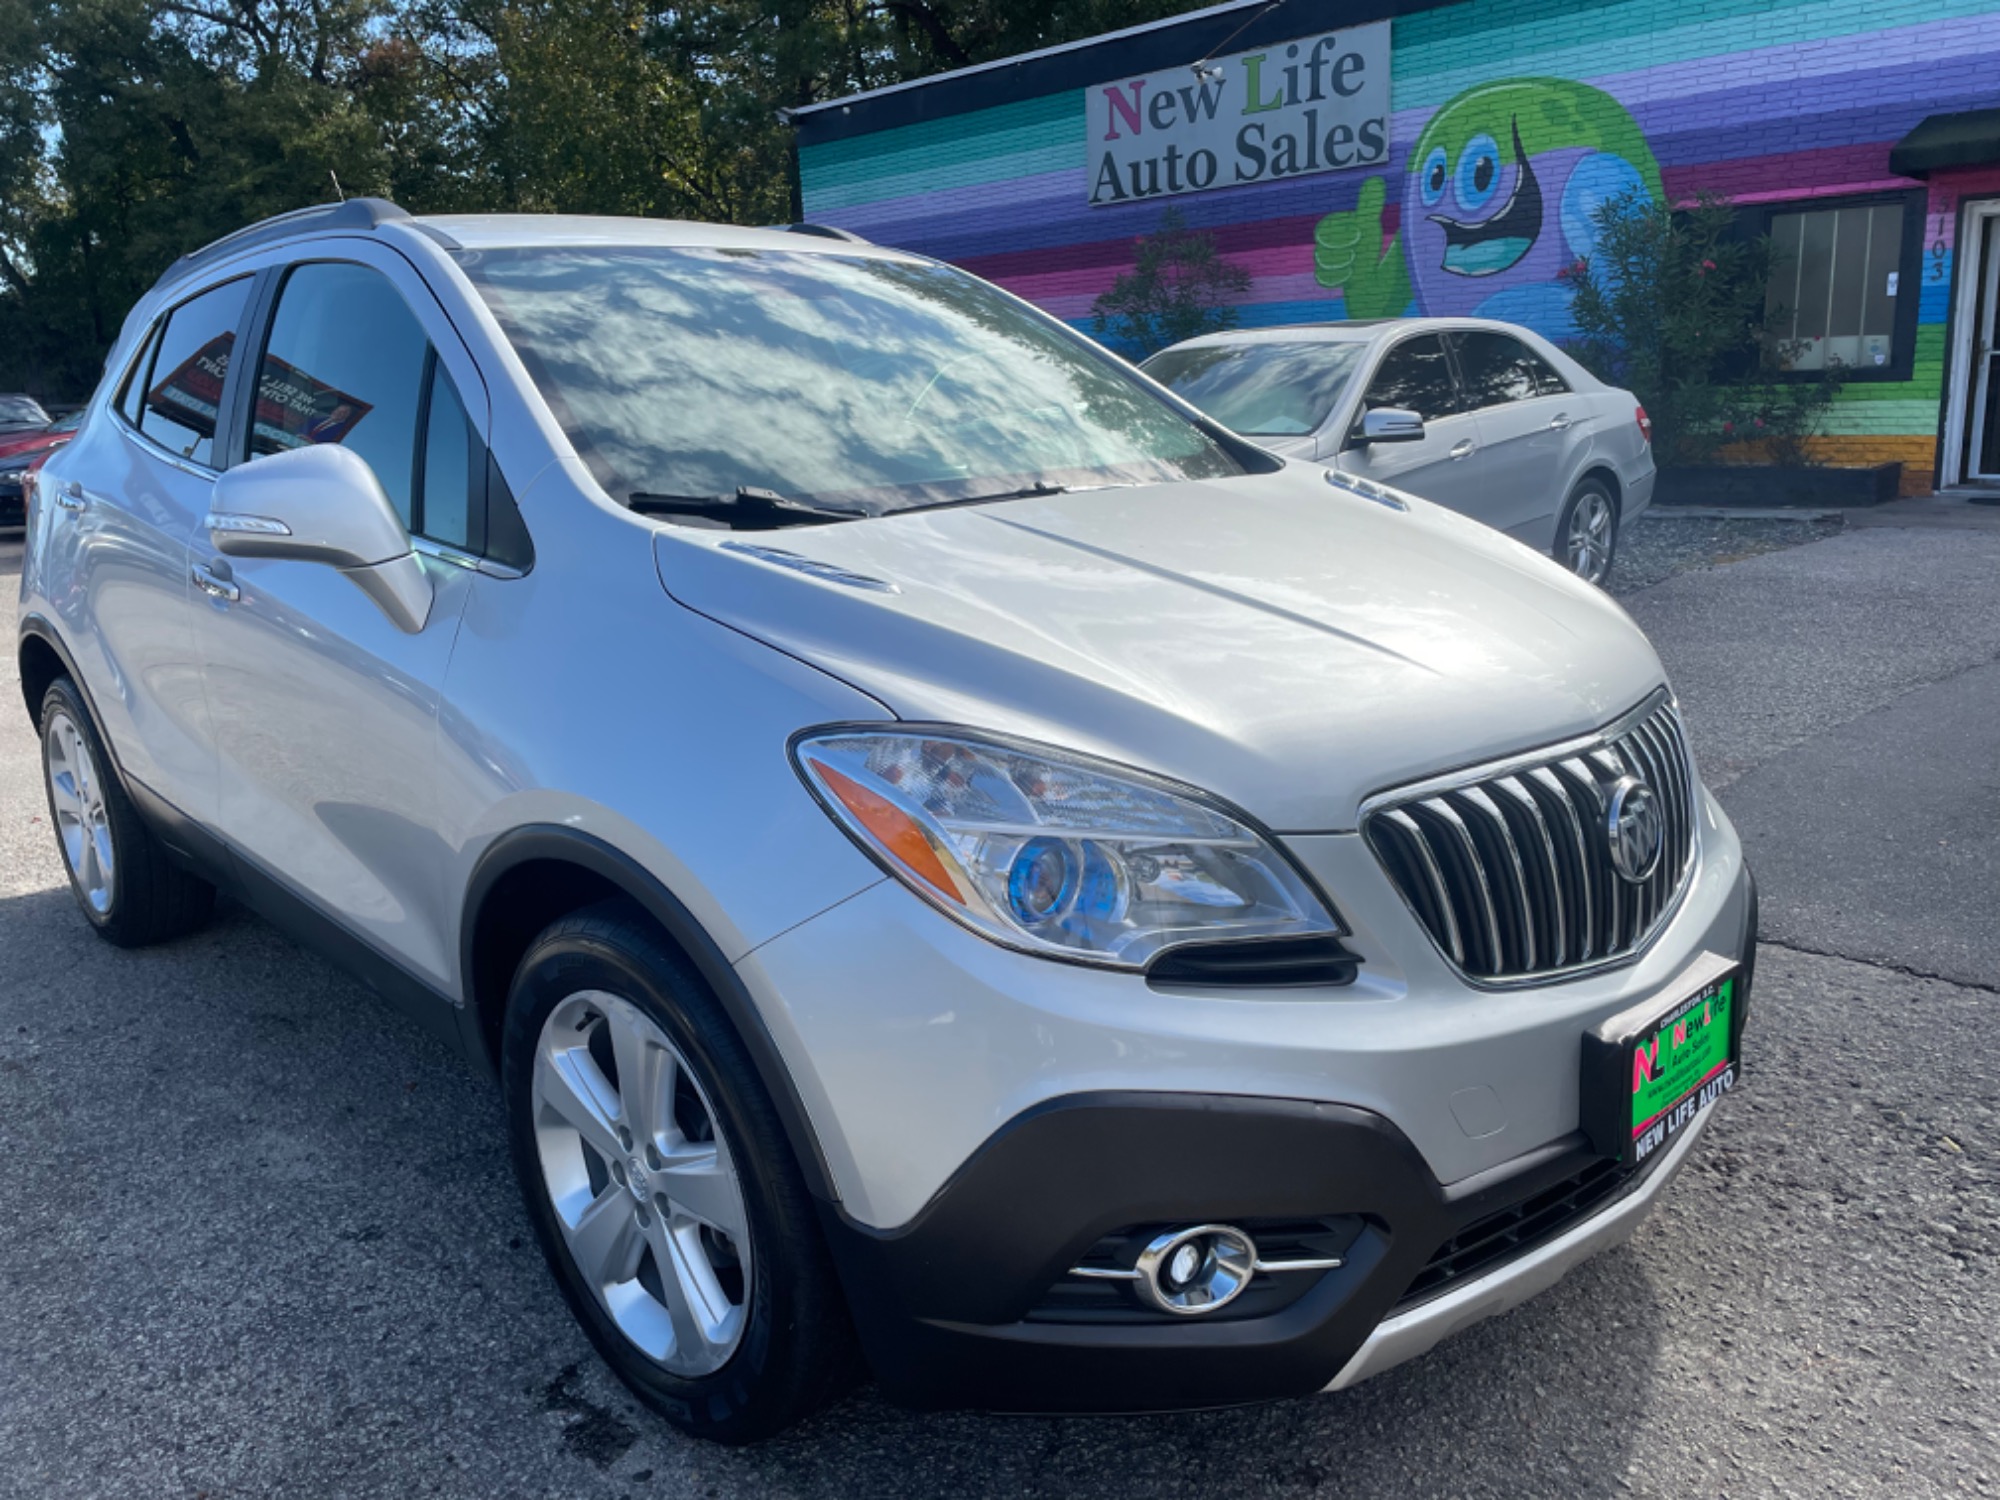 photo of 2015 BUICK ENCORE - Cute and Trendy Size! Super comfortable drive! Very Clean!